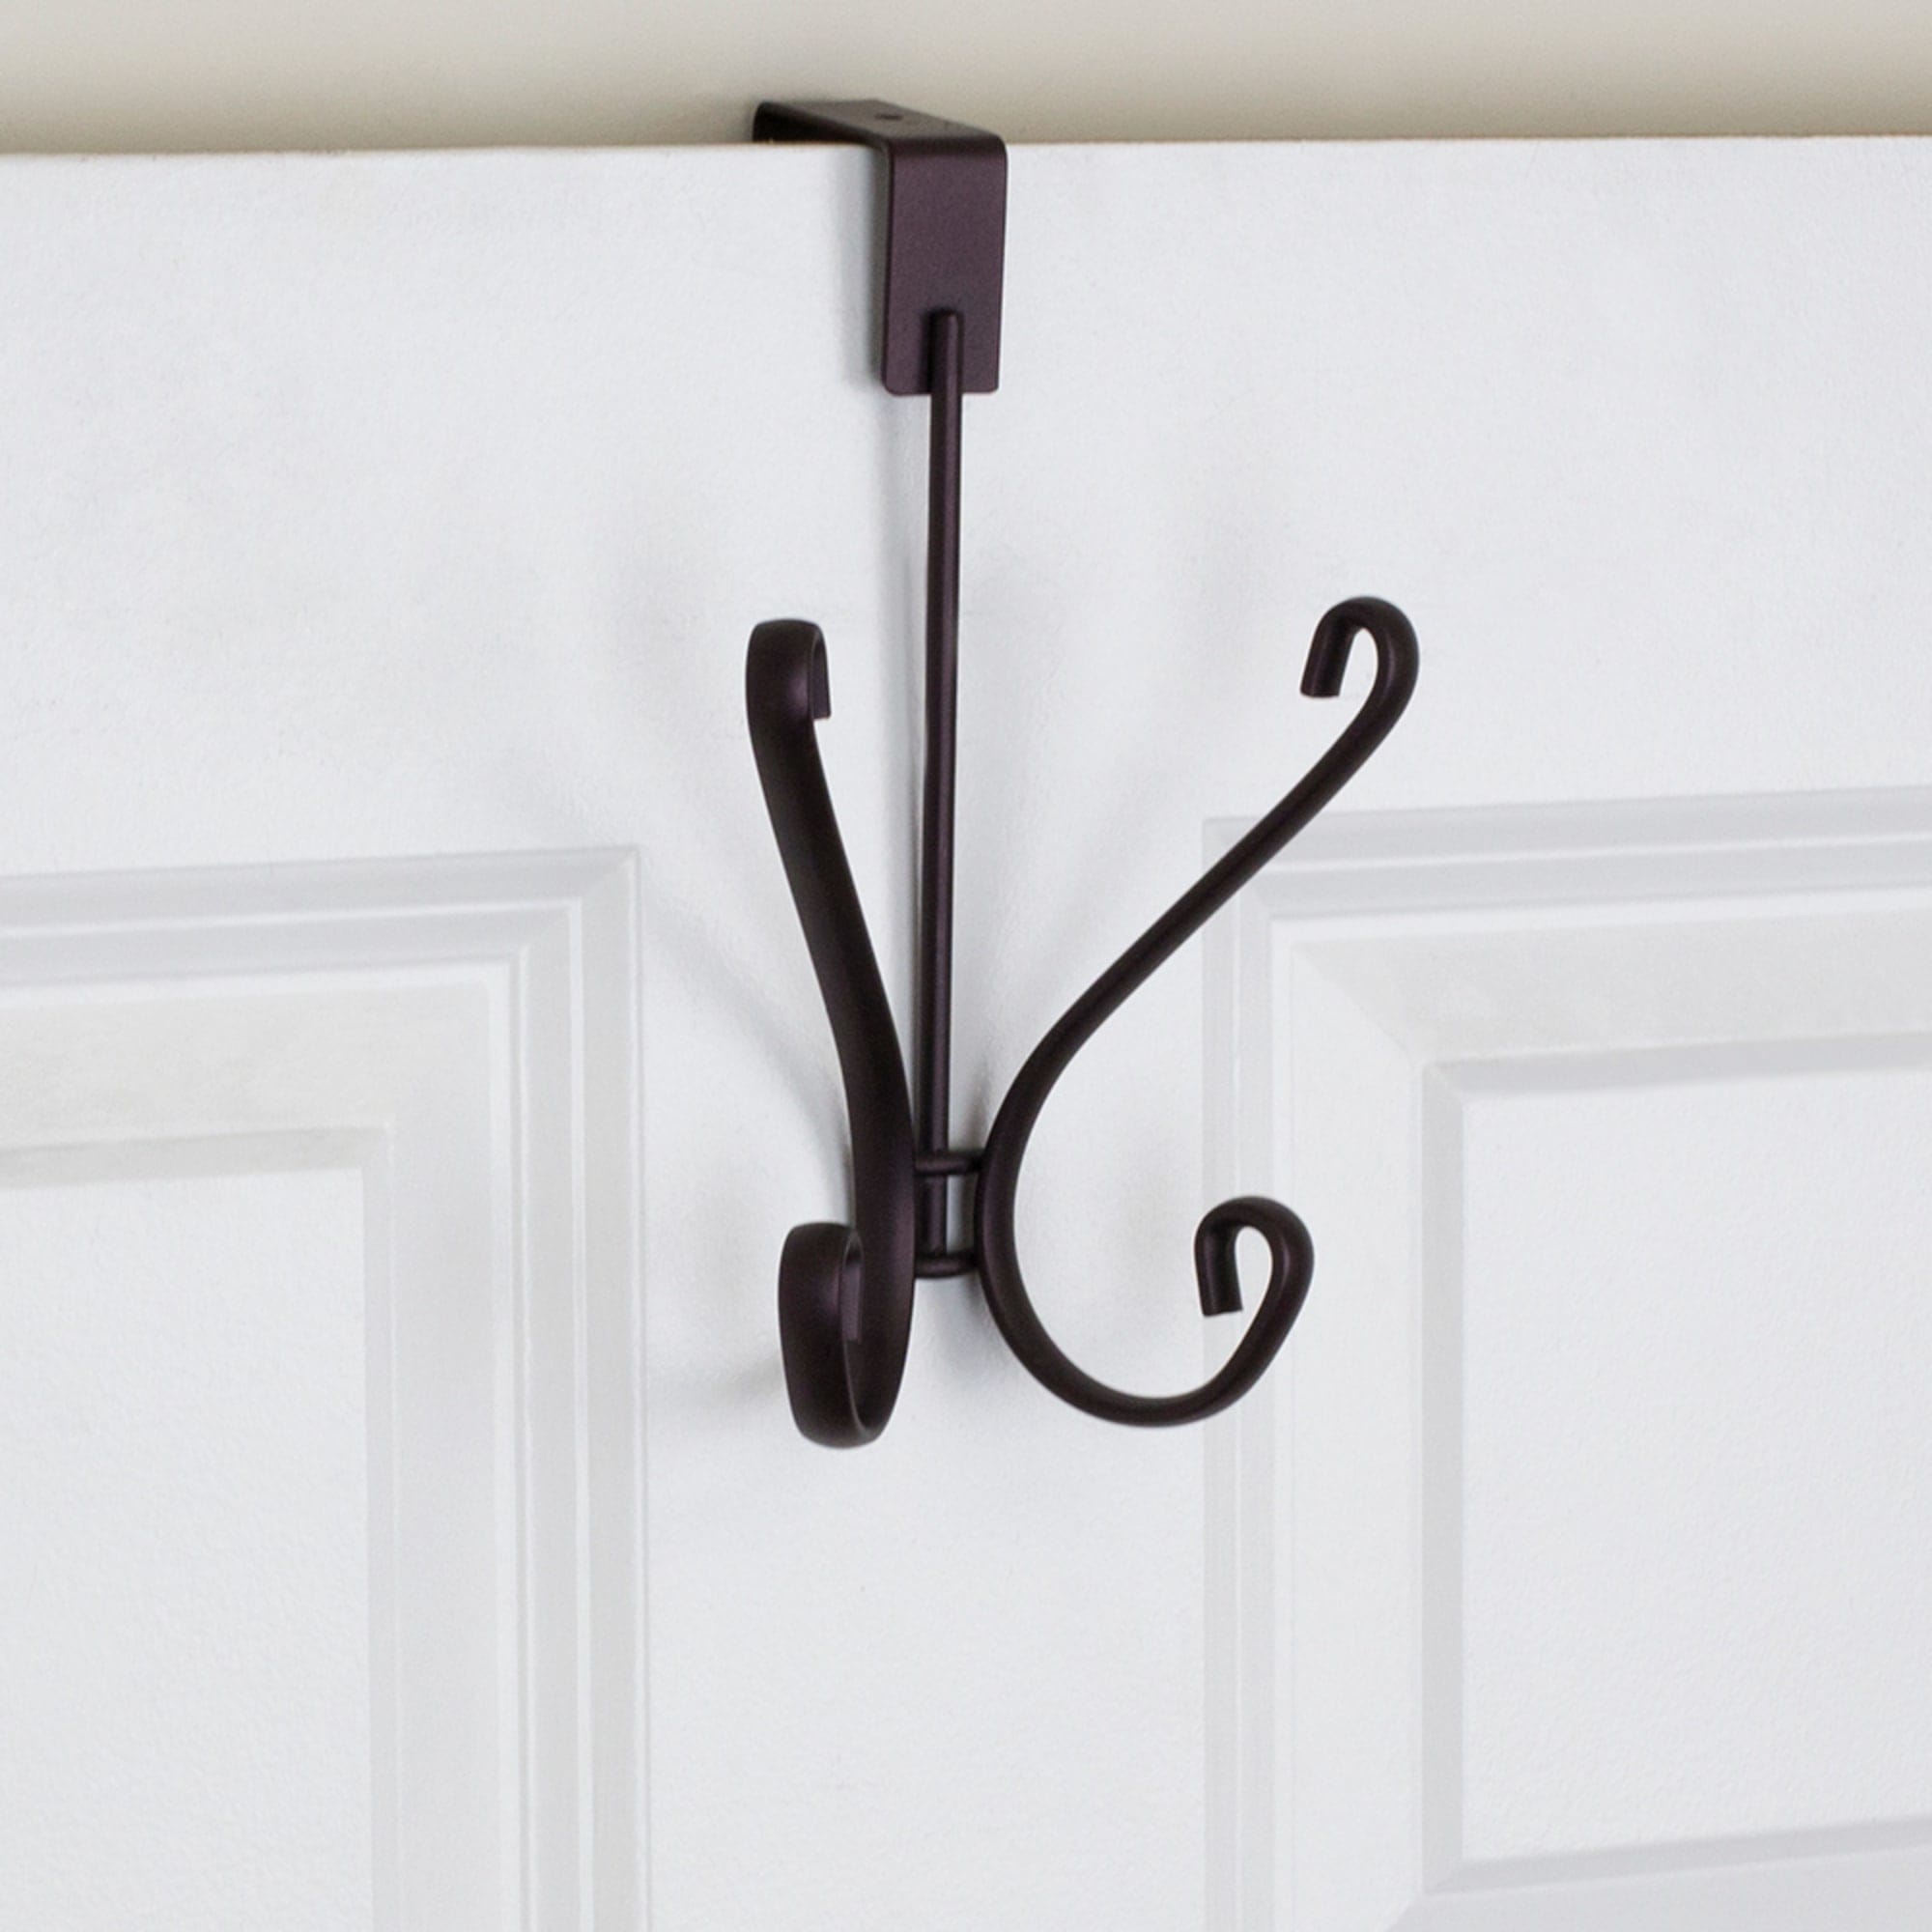 Home Basics Over the Door Double  Hanging Hook with Rounded Knobs, Bronze $4.00 EACH, CASE PACK OF 6